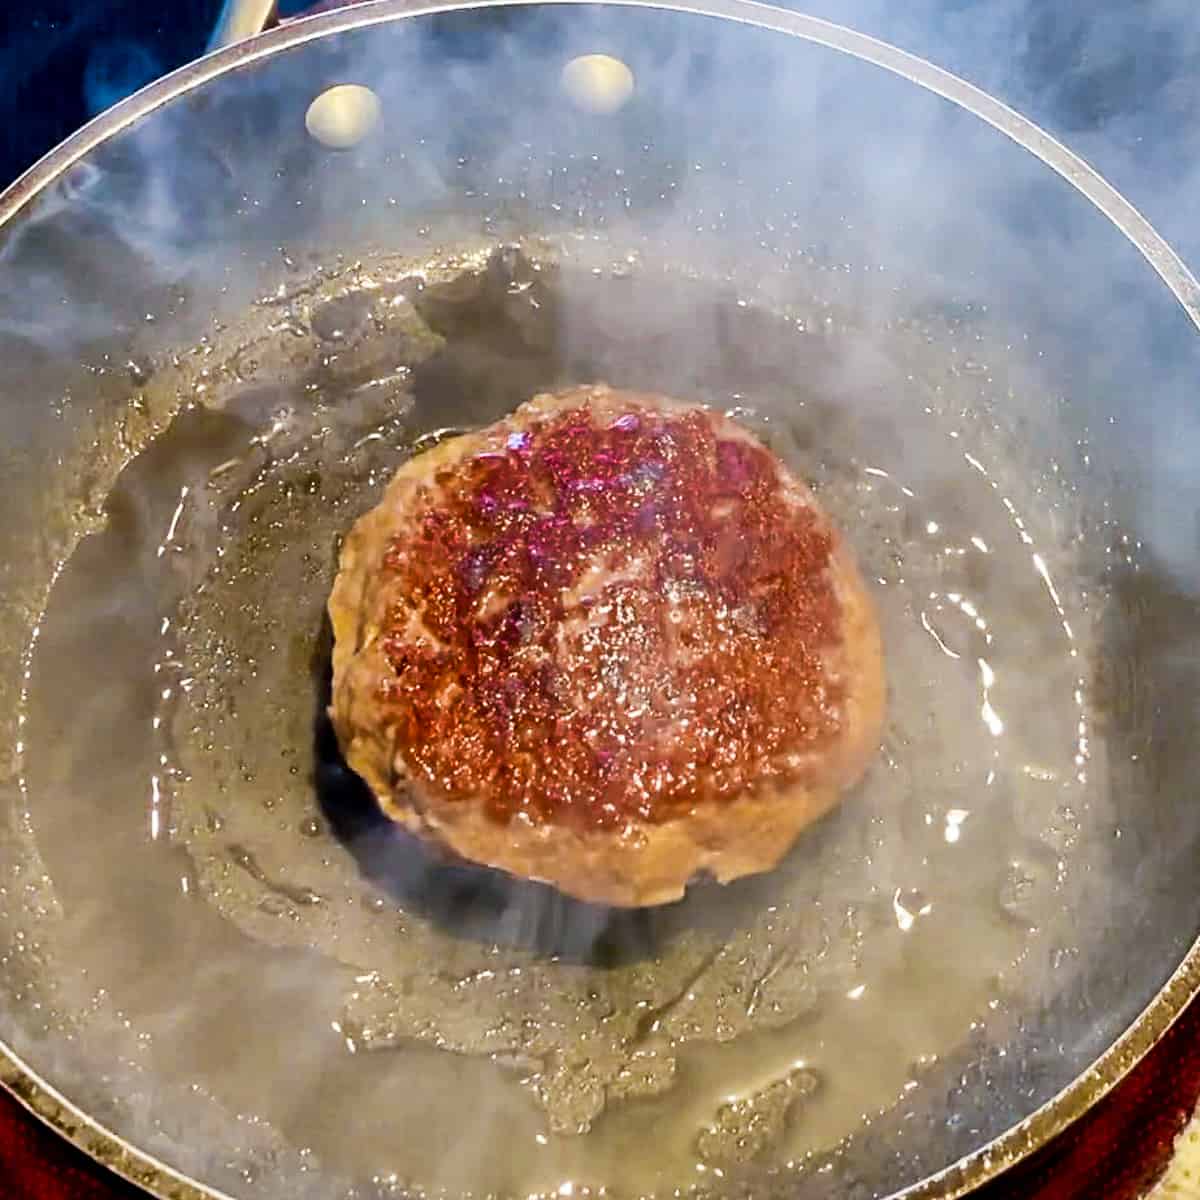 Meat patty cooking in skillet.